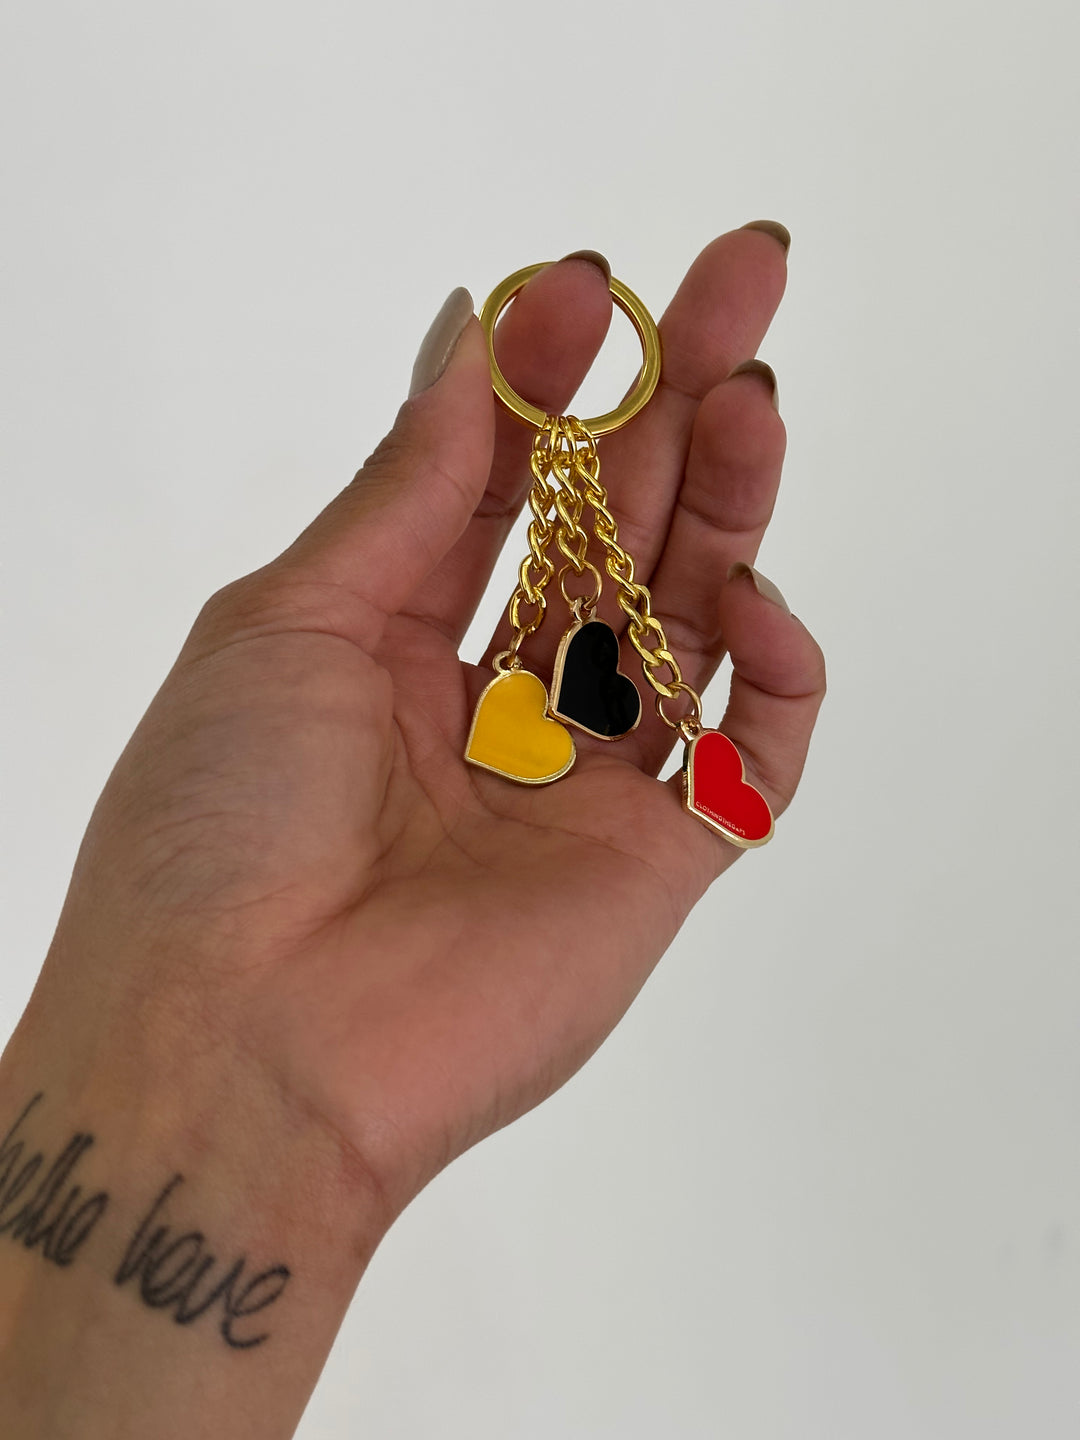 Clothing The Gaps. Blak Luv Keyring.  With gold chain and loop attached to 3 seperate hearts in the colours of the Aboriginal flag Black, yellow and red.